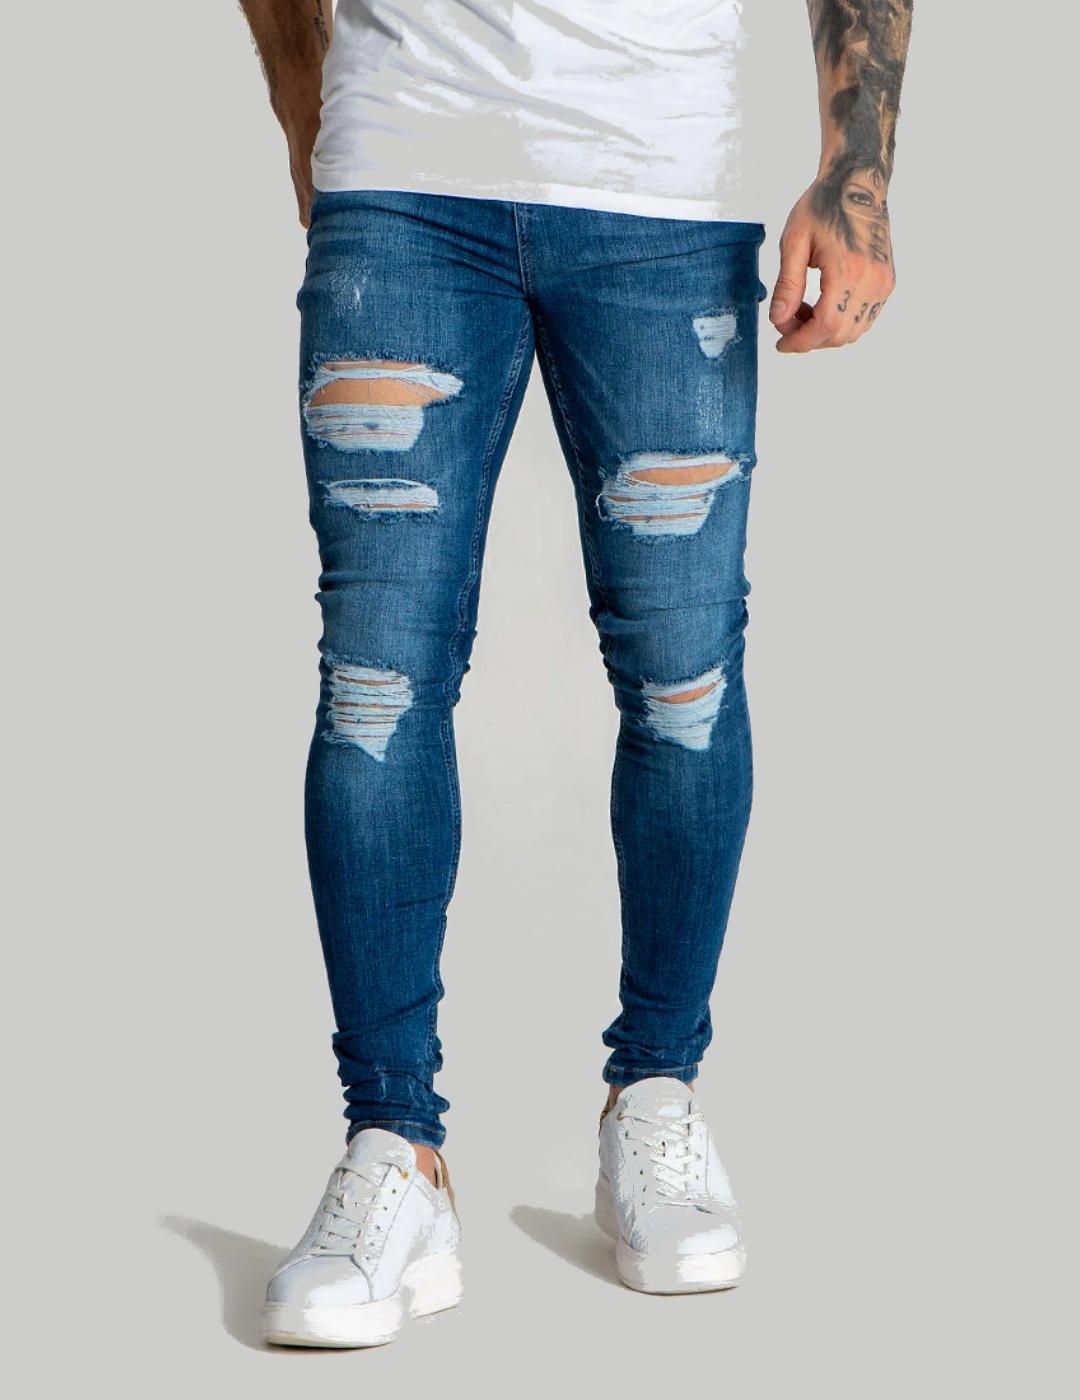 Jeans Gianni Kavanagh roto hombre